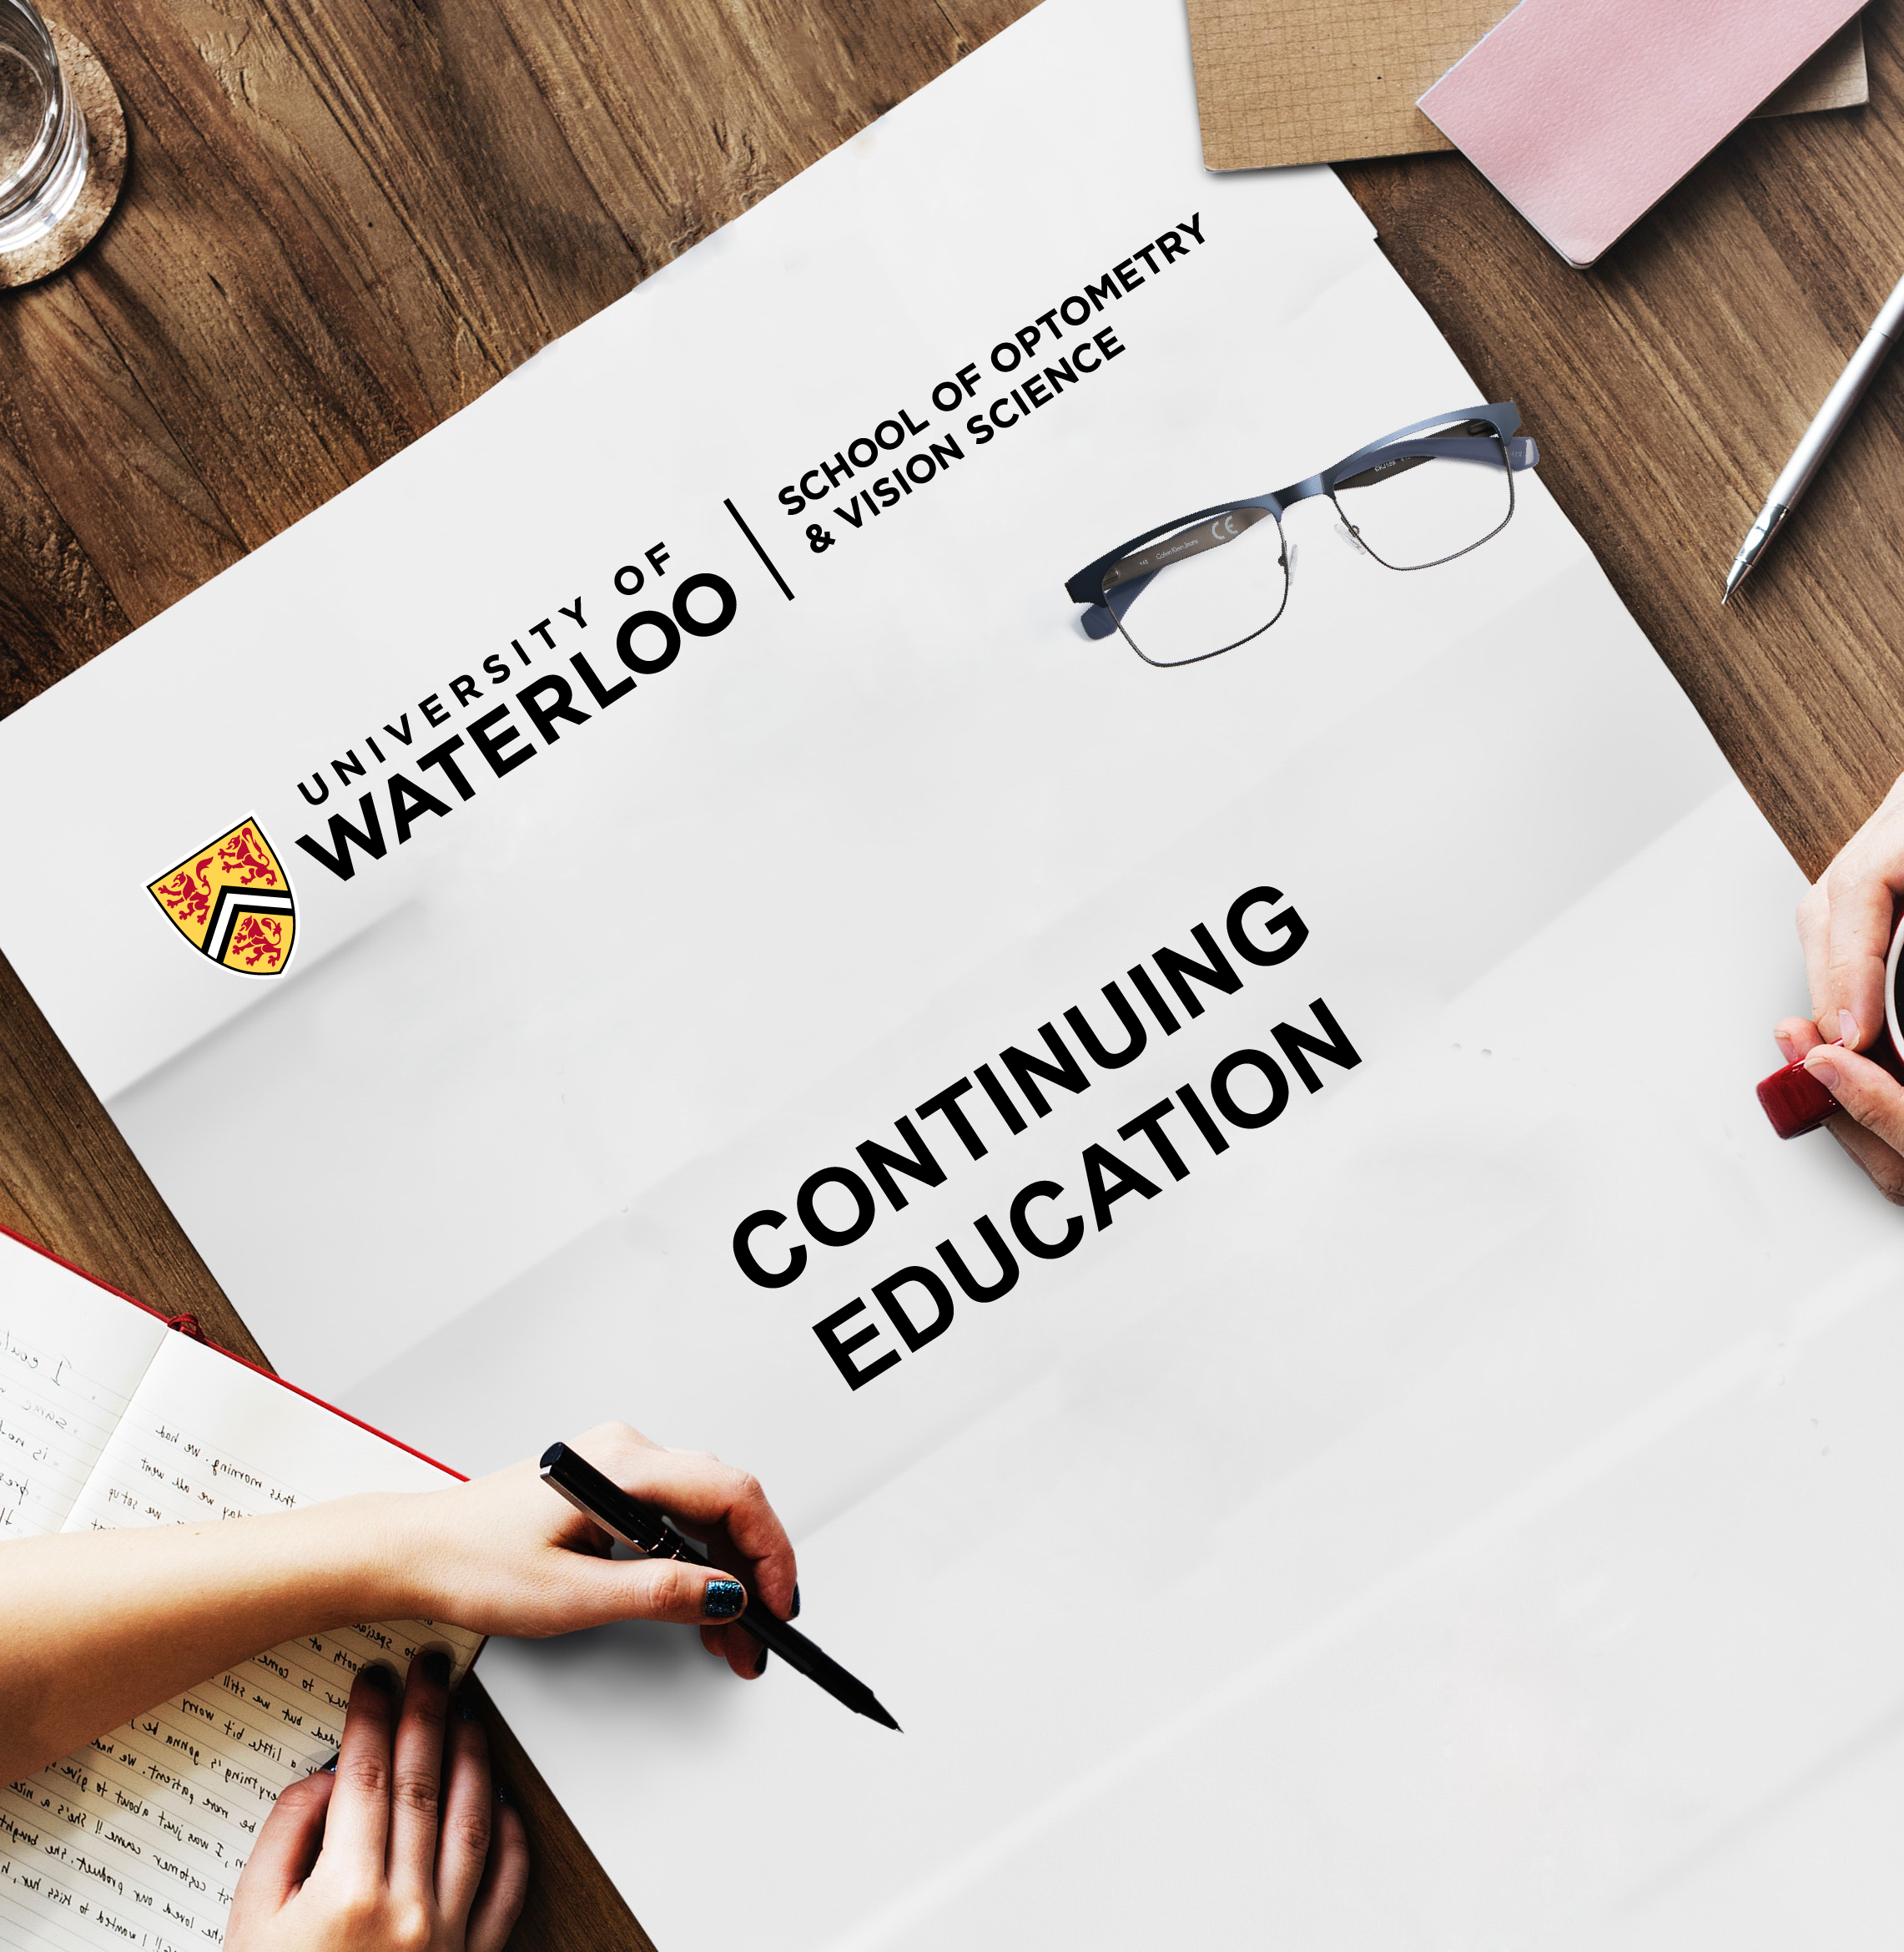 University of Waterloo - The School of Optometry and Vision Science Continuing Education